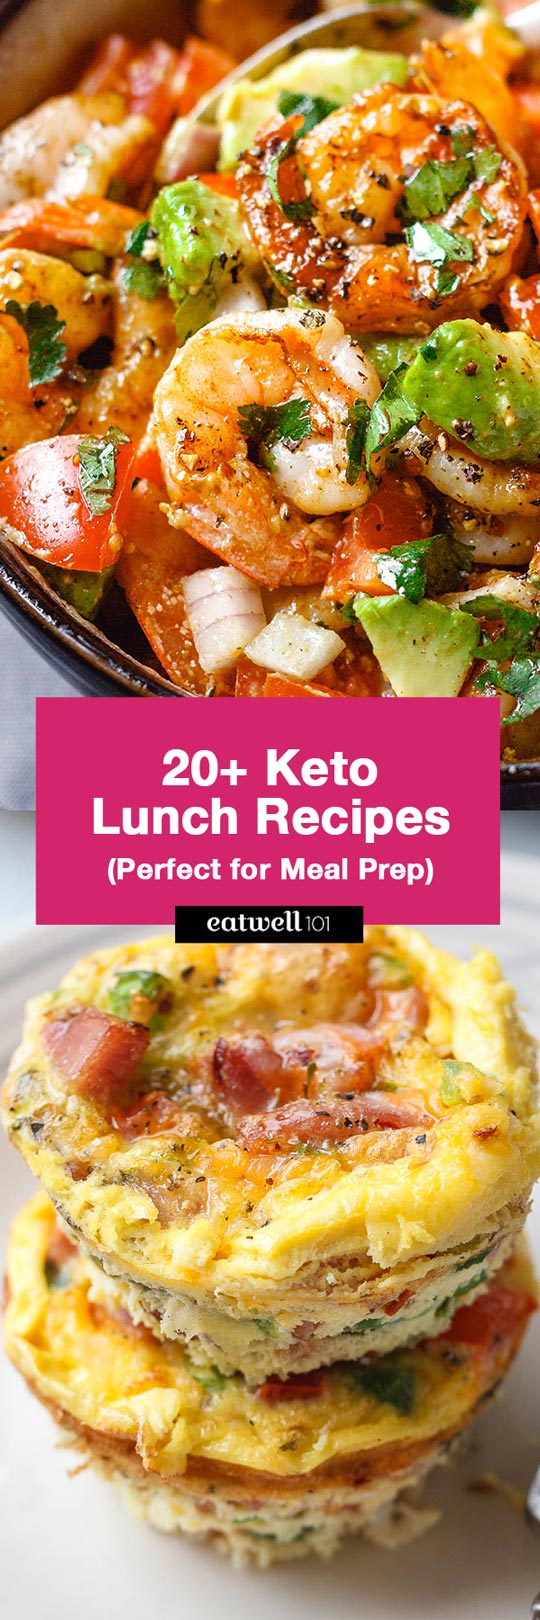 22 Keto Lunch Ideas Perfect for Meal Prep - This list makes it super simple for you to pack your lunch for work, school or on-the-go!